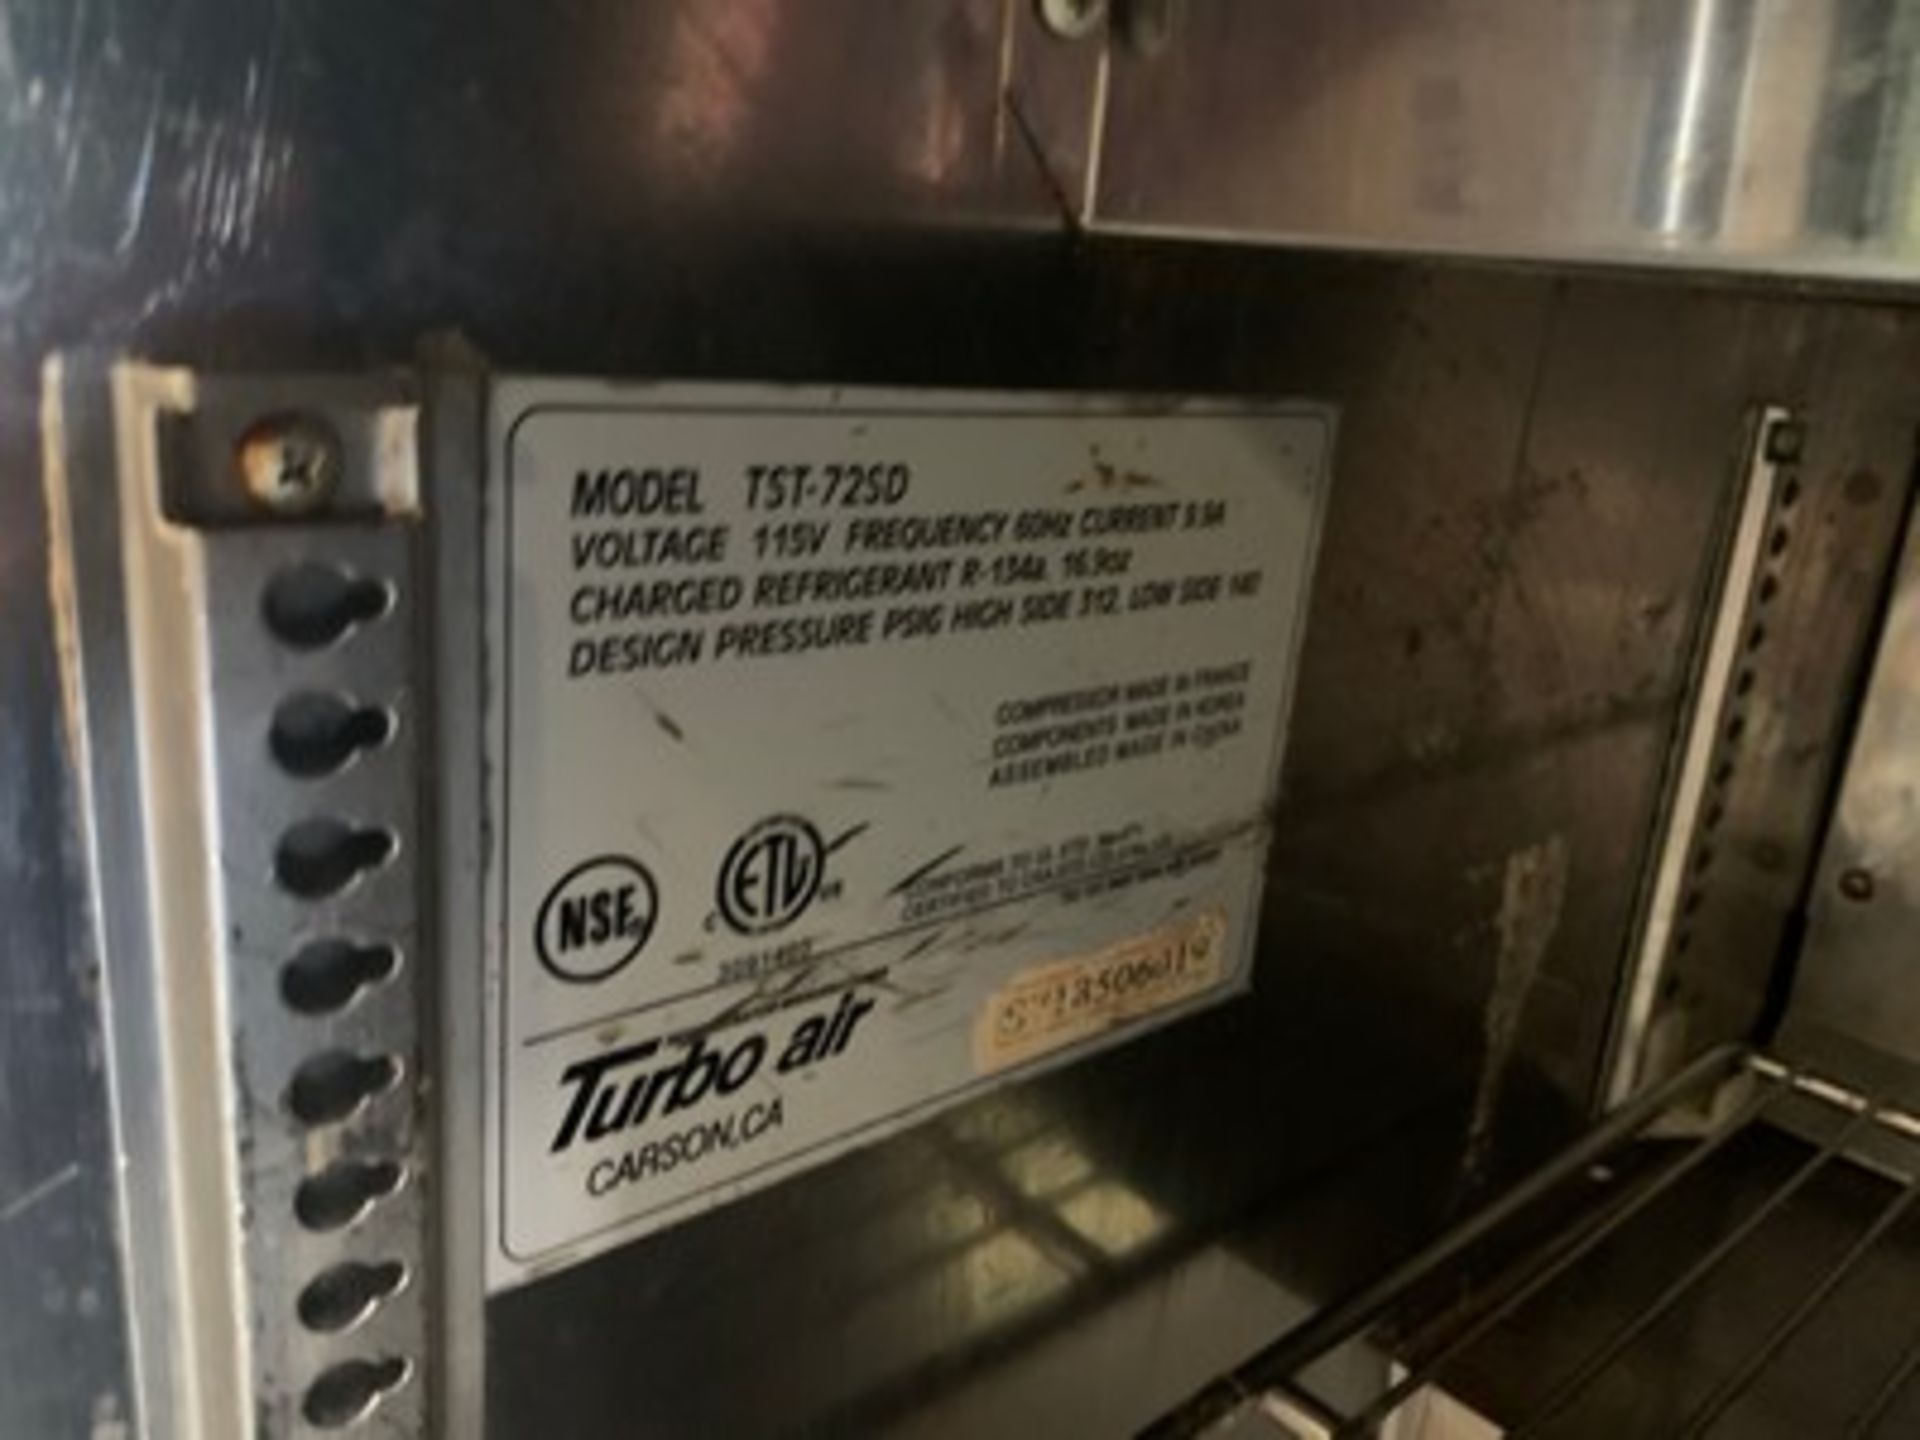 TURBO AIR 6' STAINLESS STEEL BAIN MARIE - Image 3 of 3